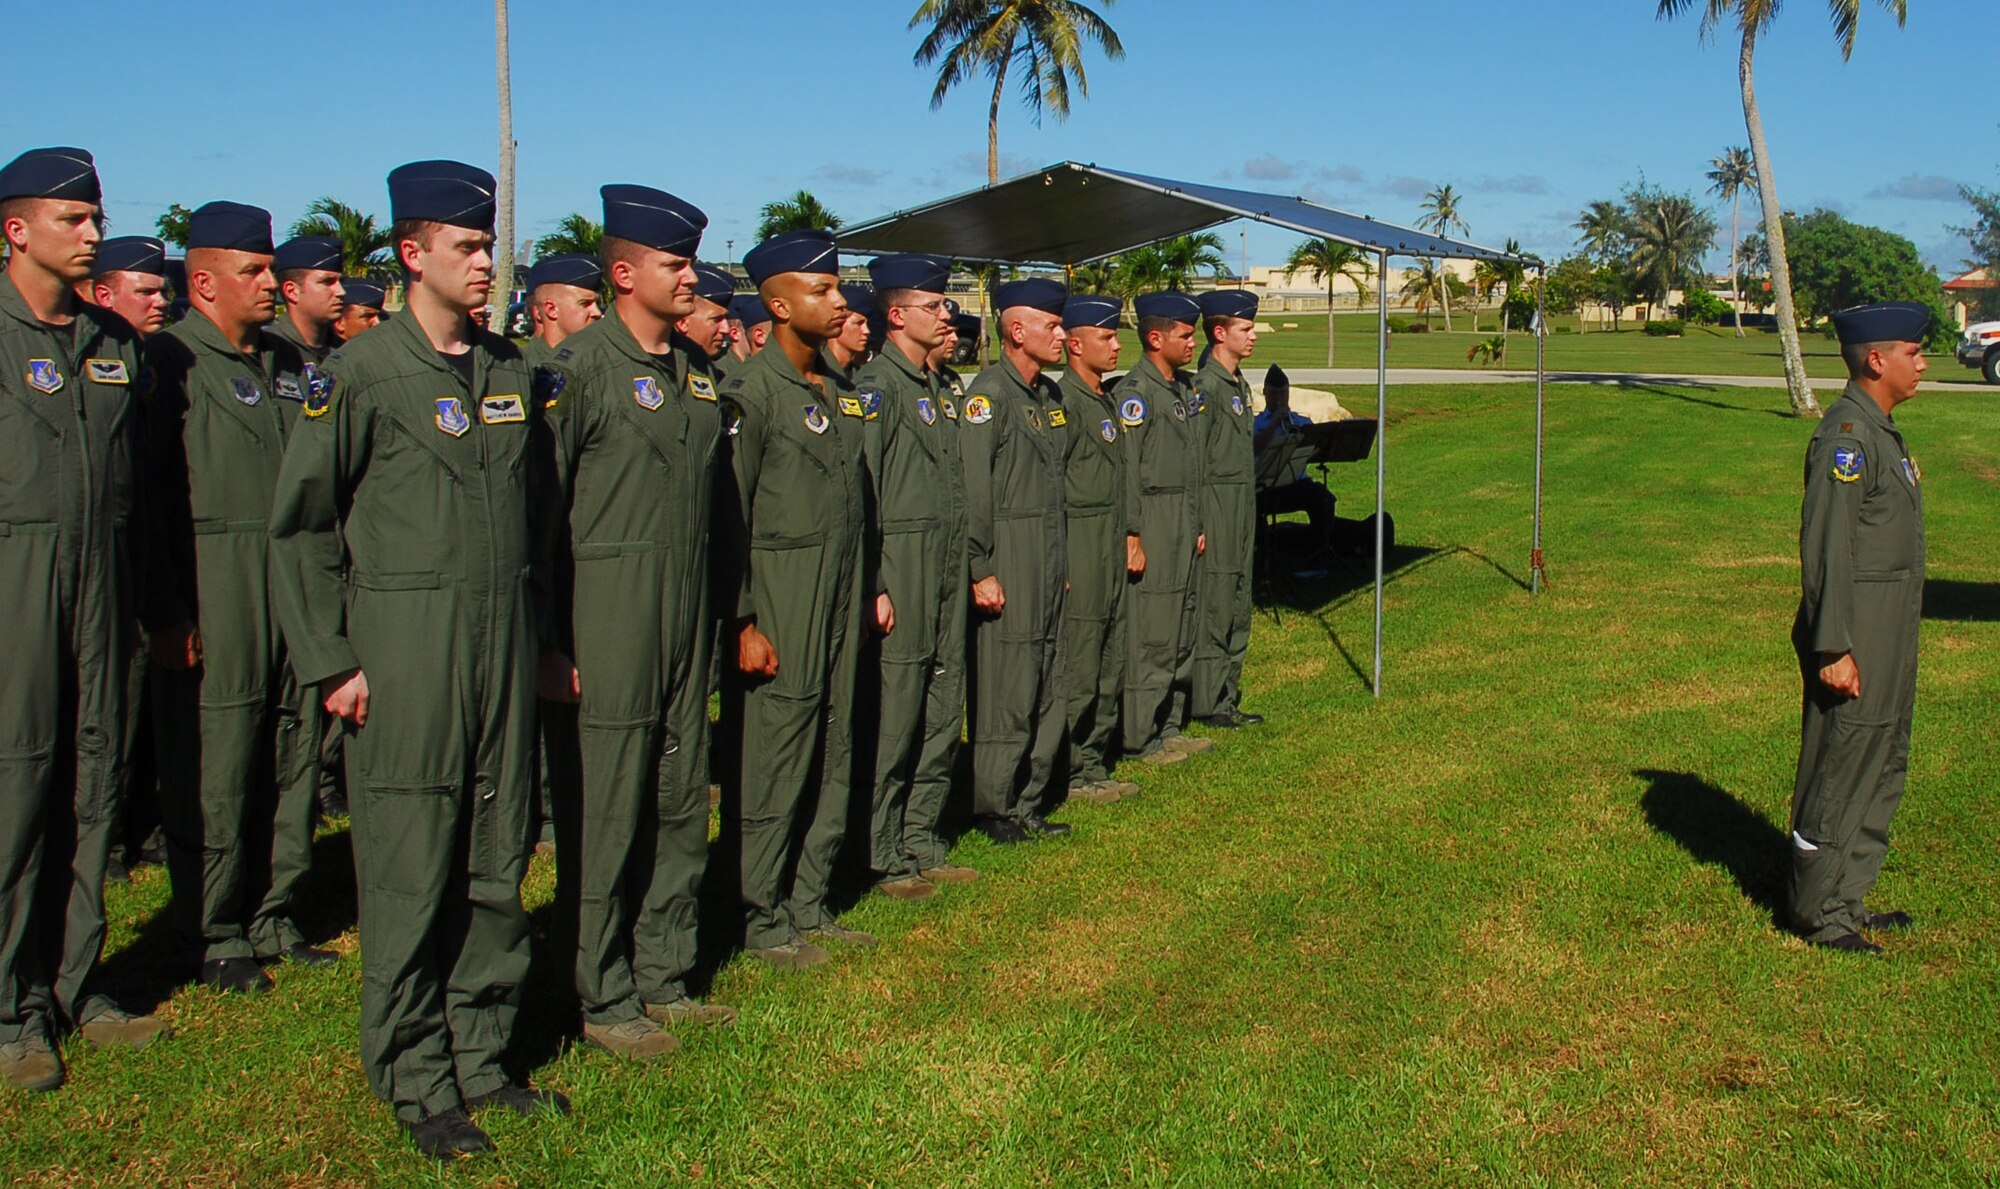 Aircrew members from the 36th Expeditionary Refueling Squadron, representing Airmen that lost their lives during Operation Linebacker ll, stand in formation during the memorial ceremony on Andersen Air Force Base, Guam, Dec. 17.  Operation Linebacker II was conducted from Dec. 18, 1972, to Dec. 29, 1972, after peace talks between the U.S. and North Vietnam broke down.  (U.S. Air Force photo/Staff Sgt. Jamie Powell)